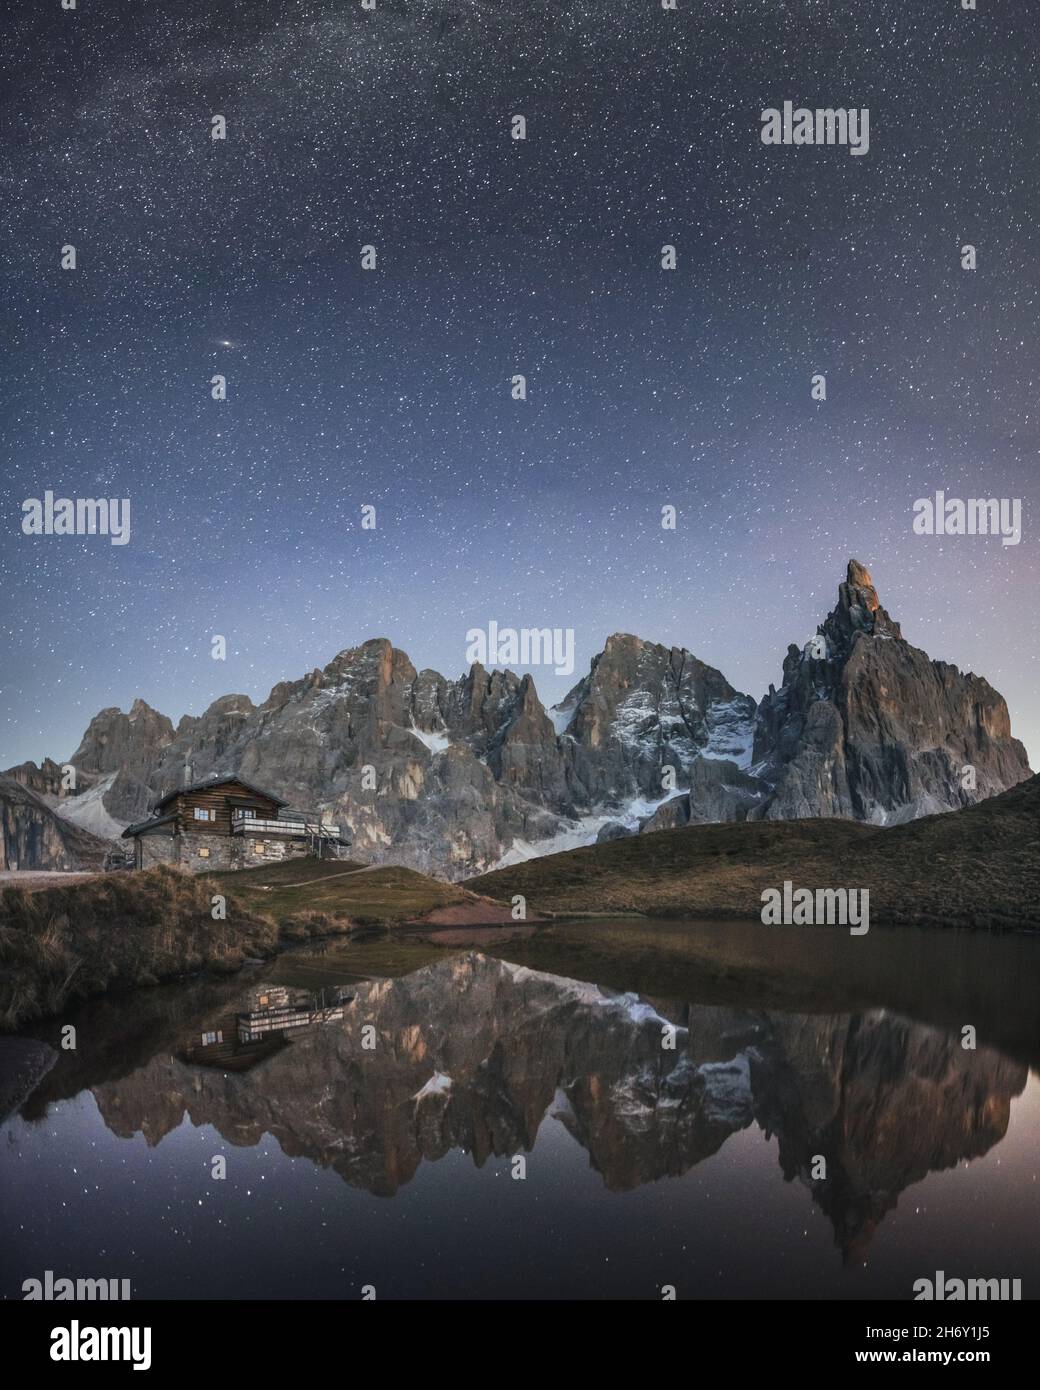 Incredible night landscape with a reflection of starry sky and mountains in a water of small lake in a popular tourist destination - Baita Segantini mountain refuge. Rolle Pass, Dolomites Alps, Italy Stock Photo